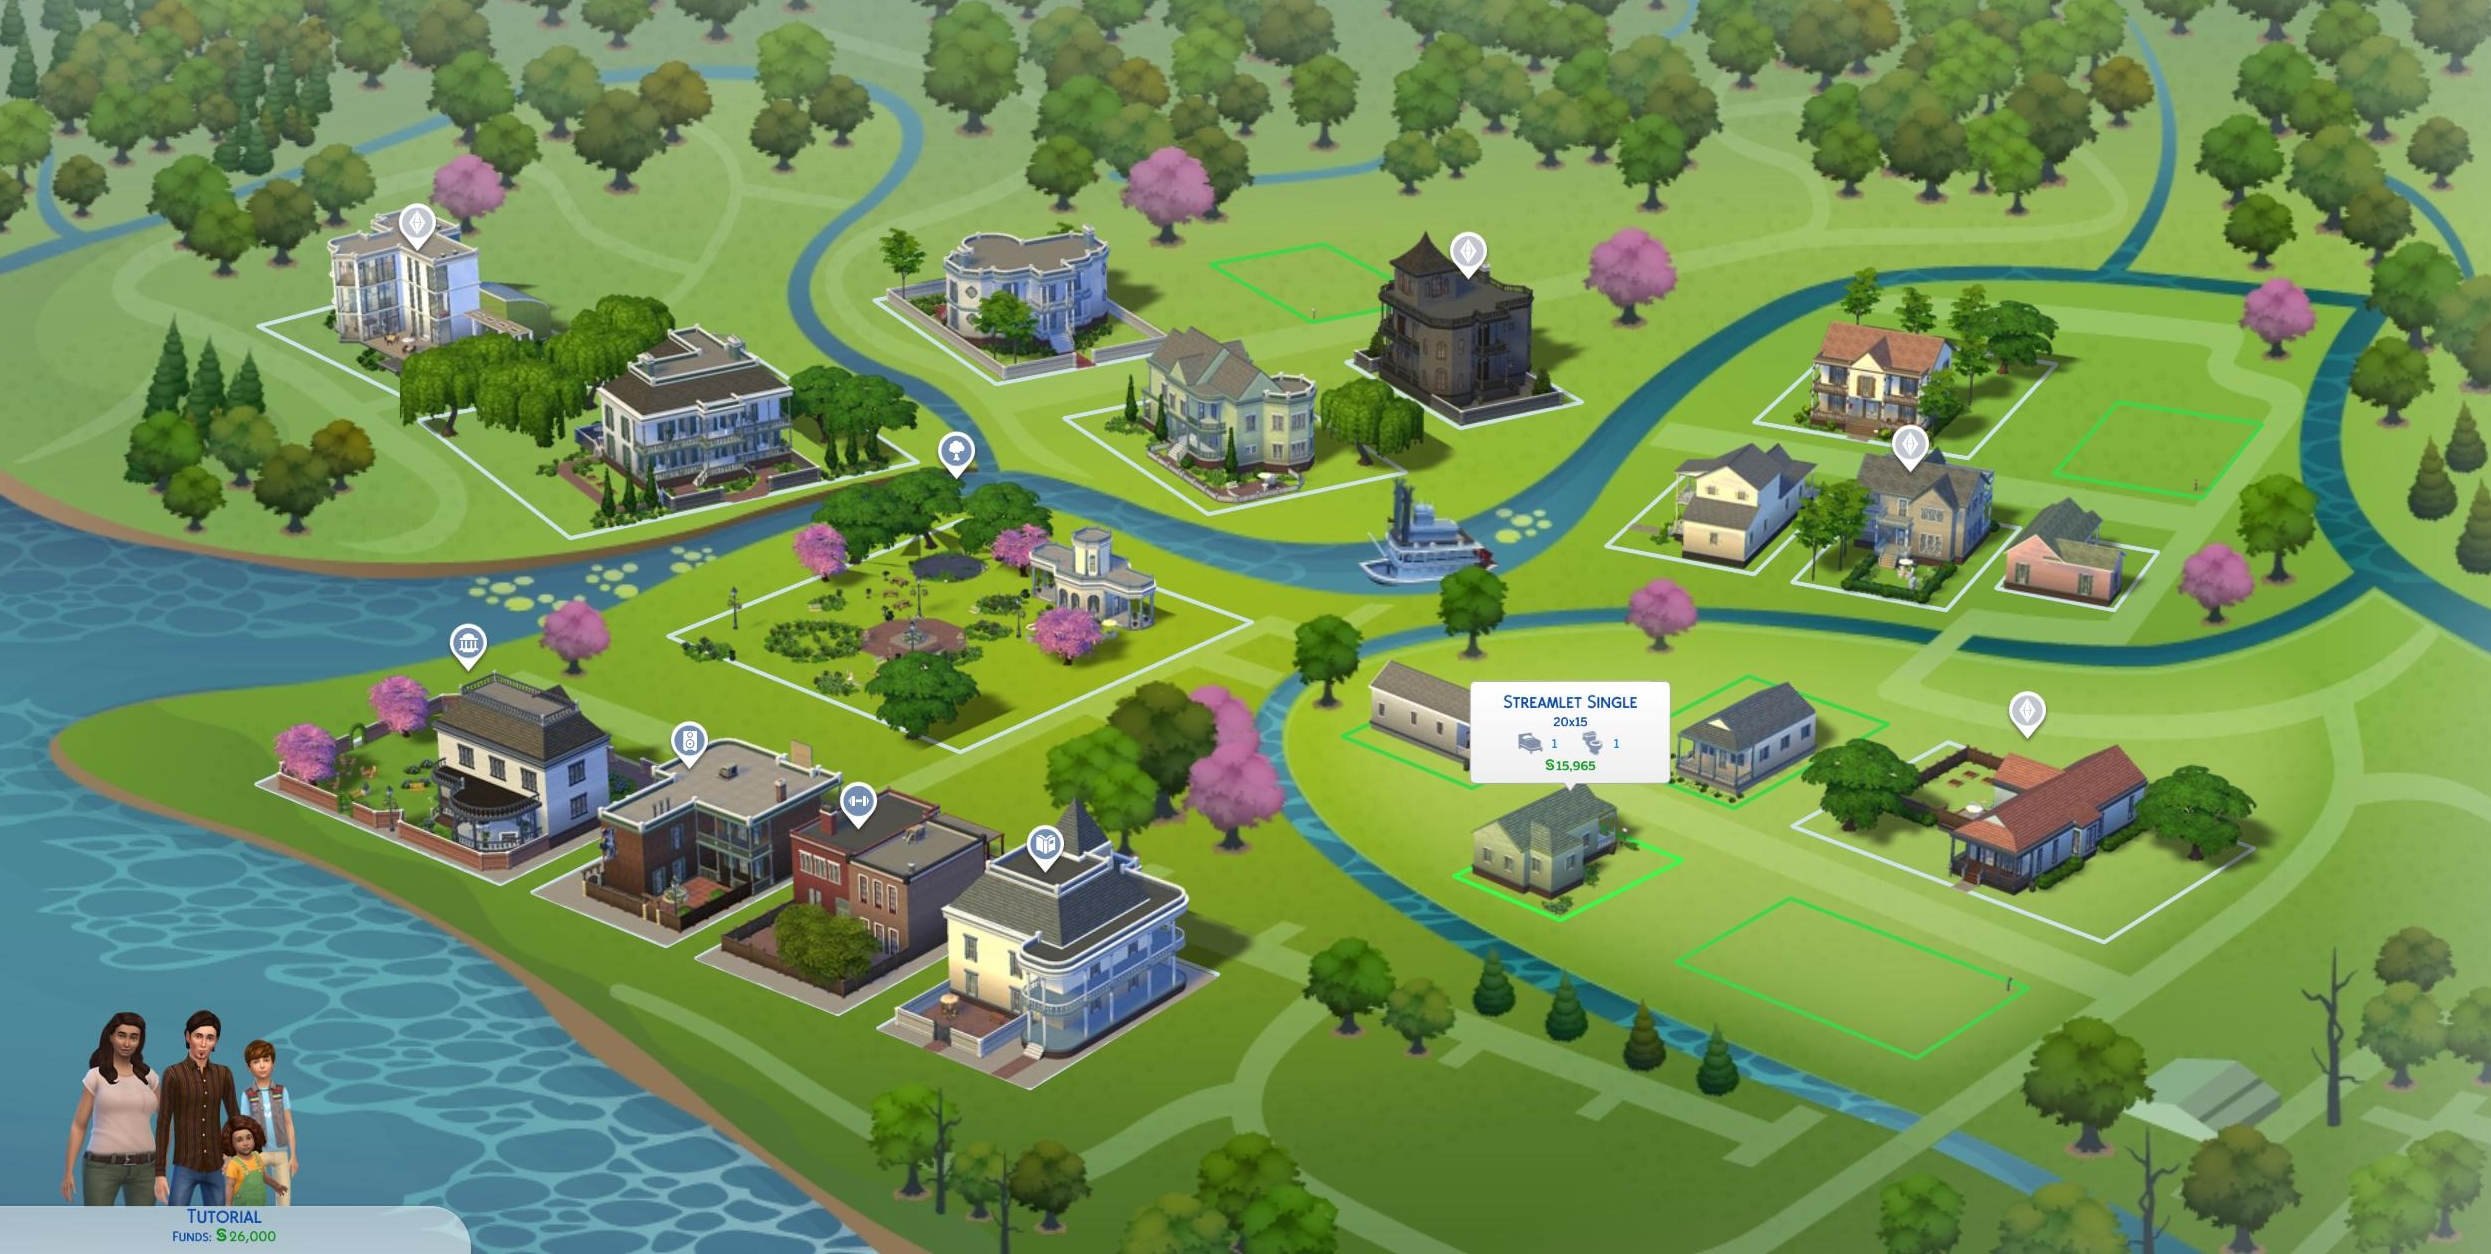 How to improve over a blank lot for a house in The Sims 4